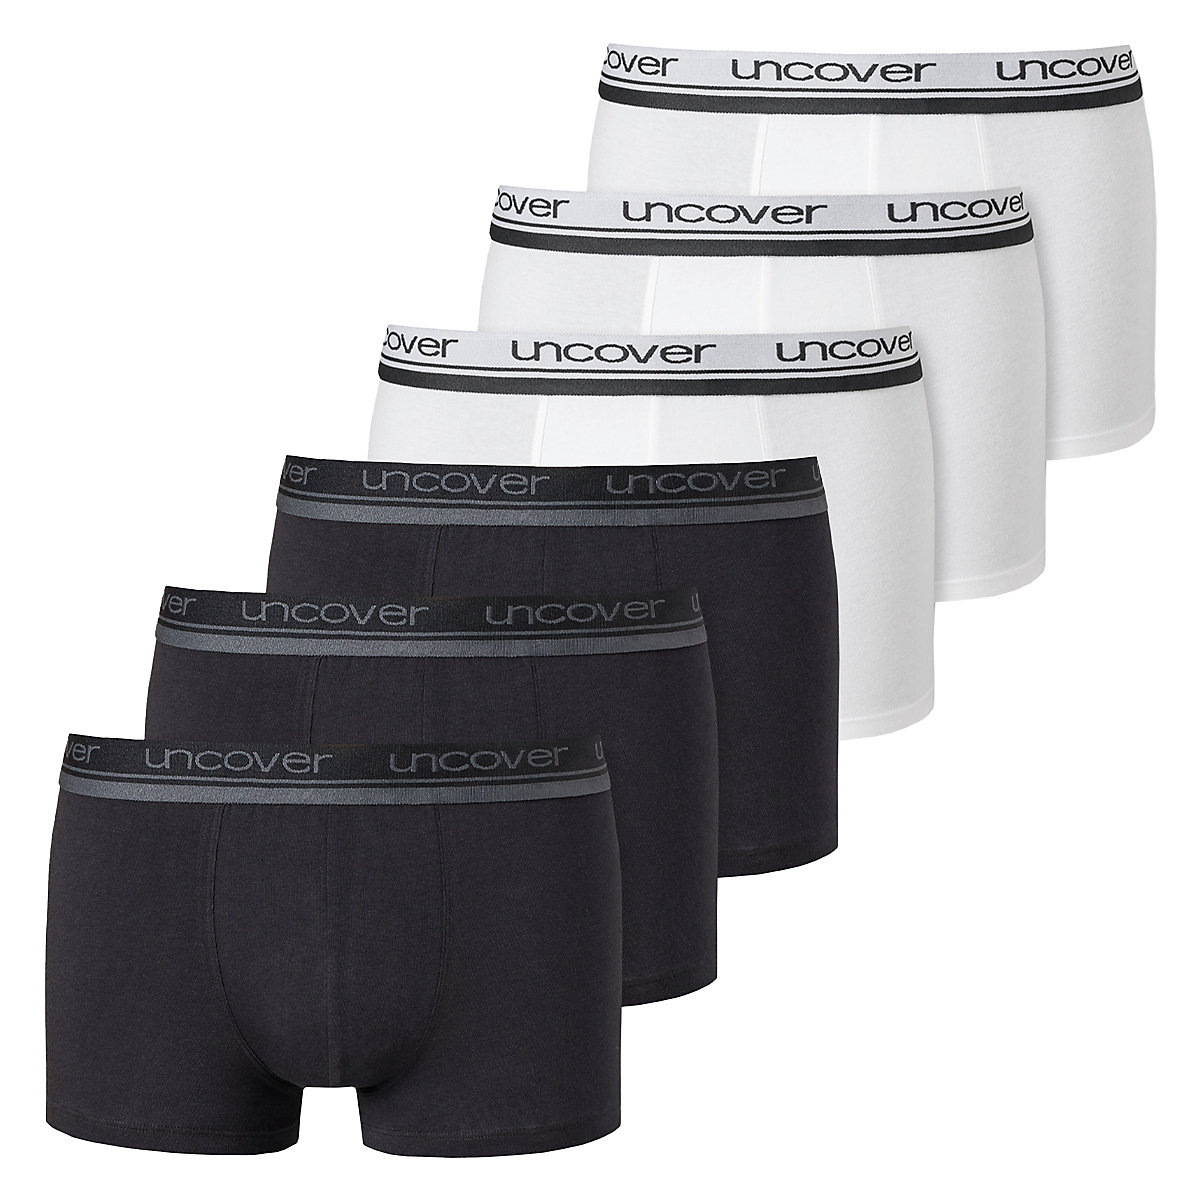 uncover by SCHIESSER Retro Shorts / Pant 6er Pack Basic Panties mehrfarbig